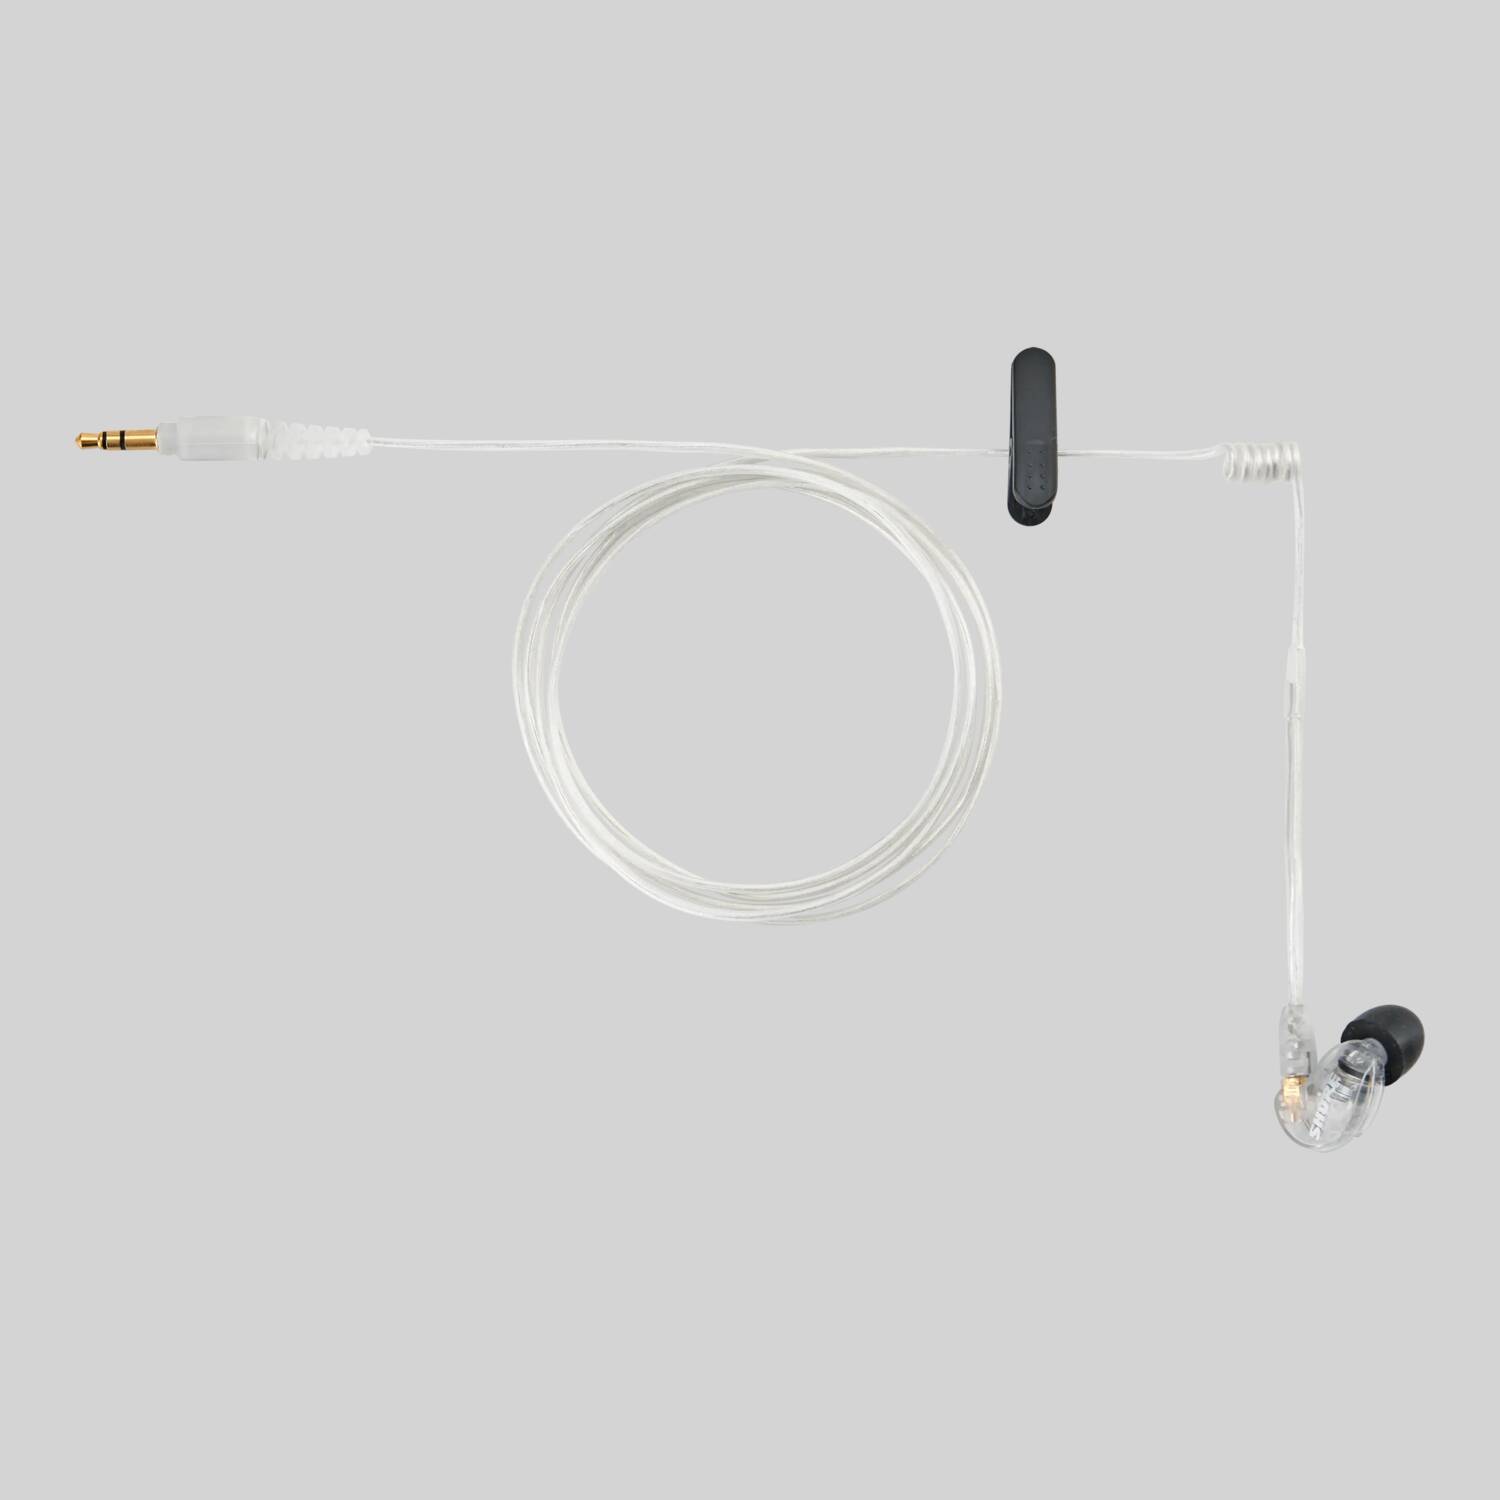 EAC-IFB - Accessory Cable for use with Sound Isolating™ Earphones